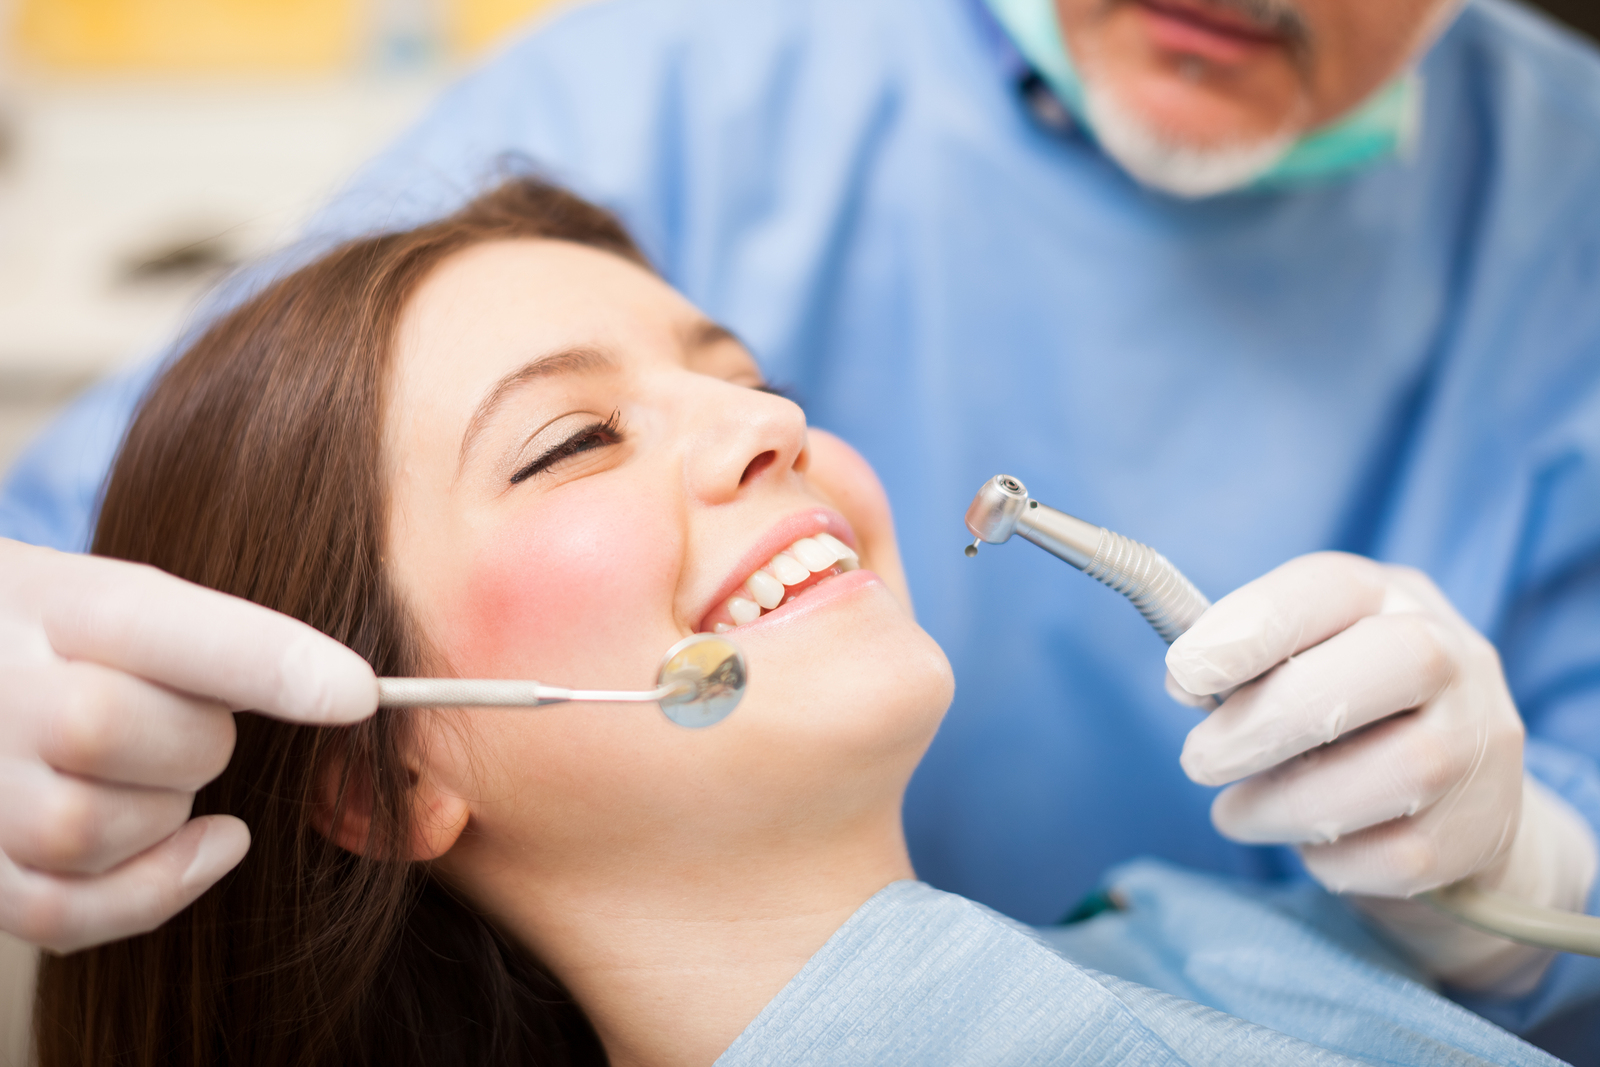 Dental-Care-Services-and-Plans.jpg